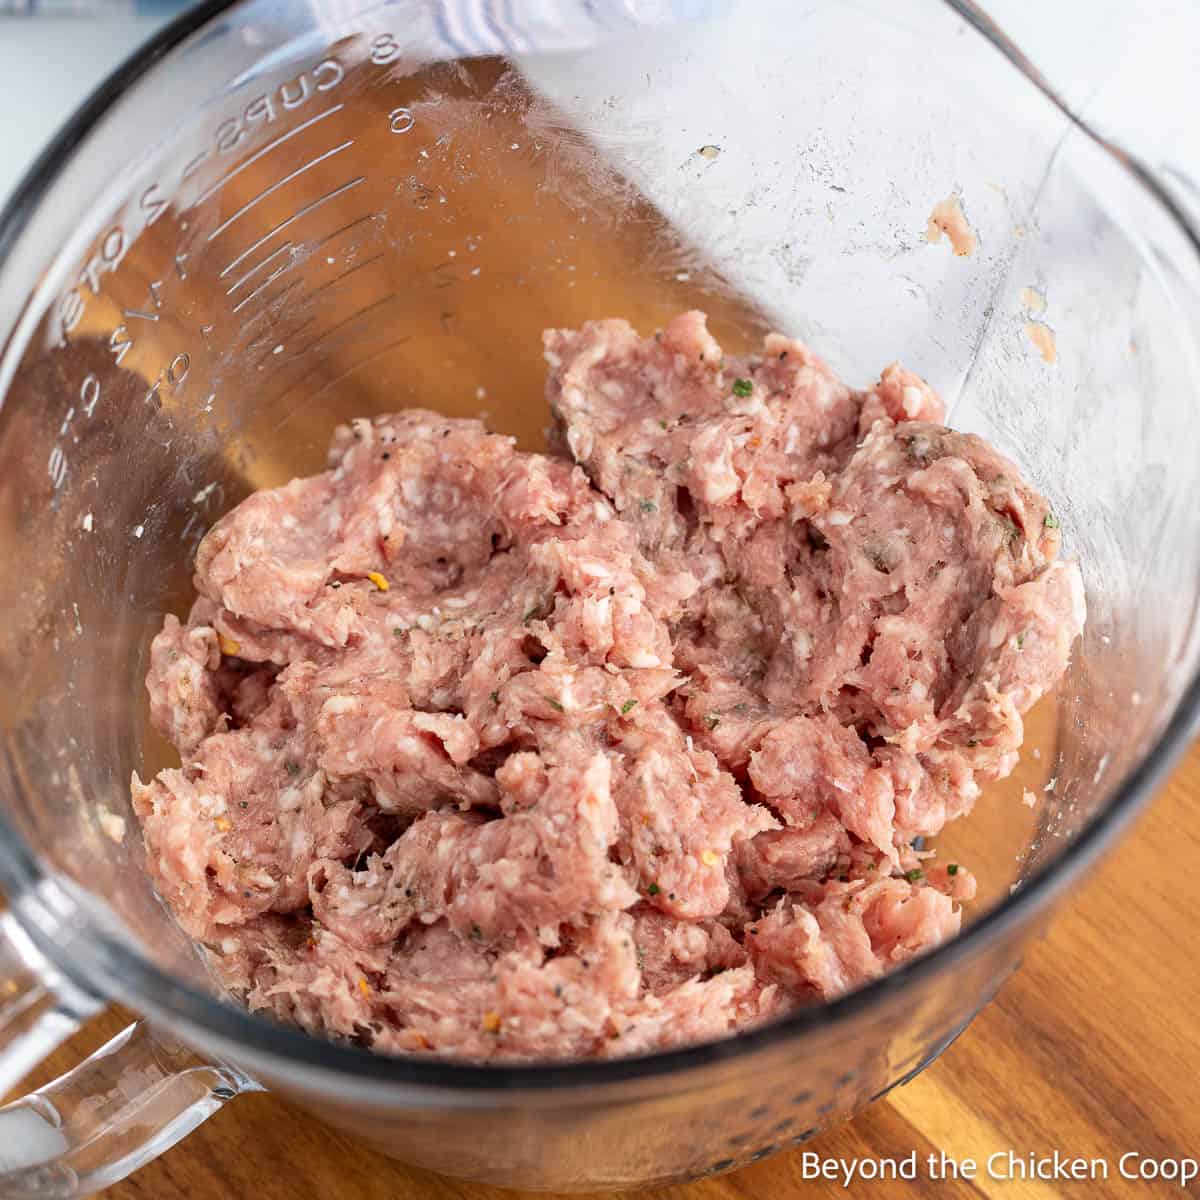 Mixed pork sausage in a bowl. 